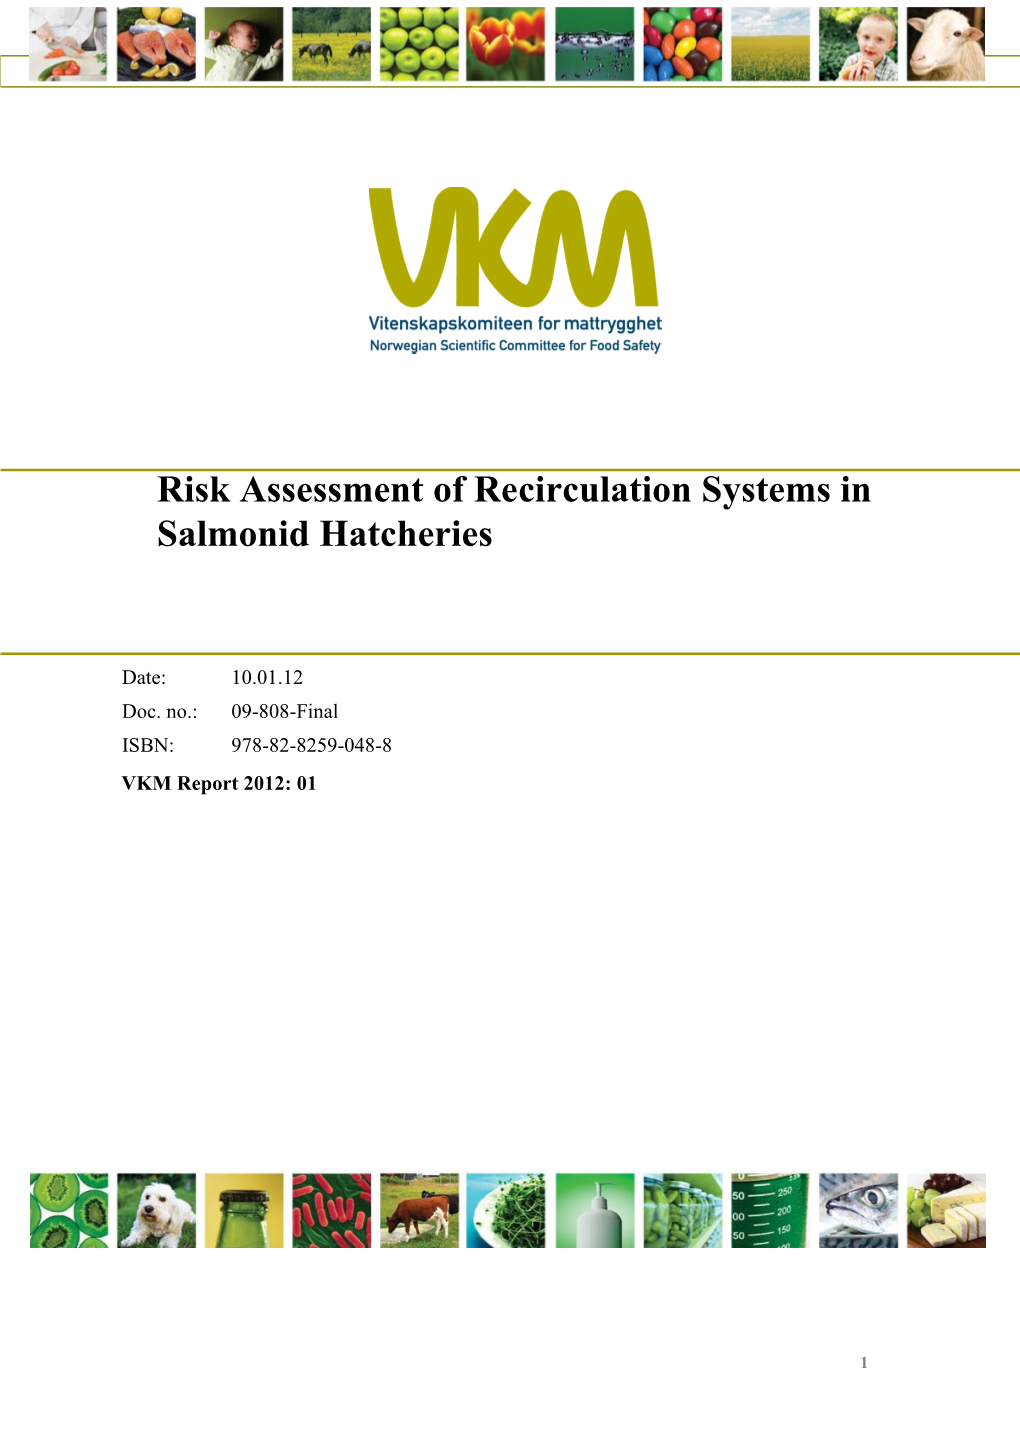 Risk Assessment of Recirculation Systems in Salmonid Hatcheries